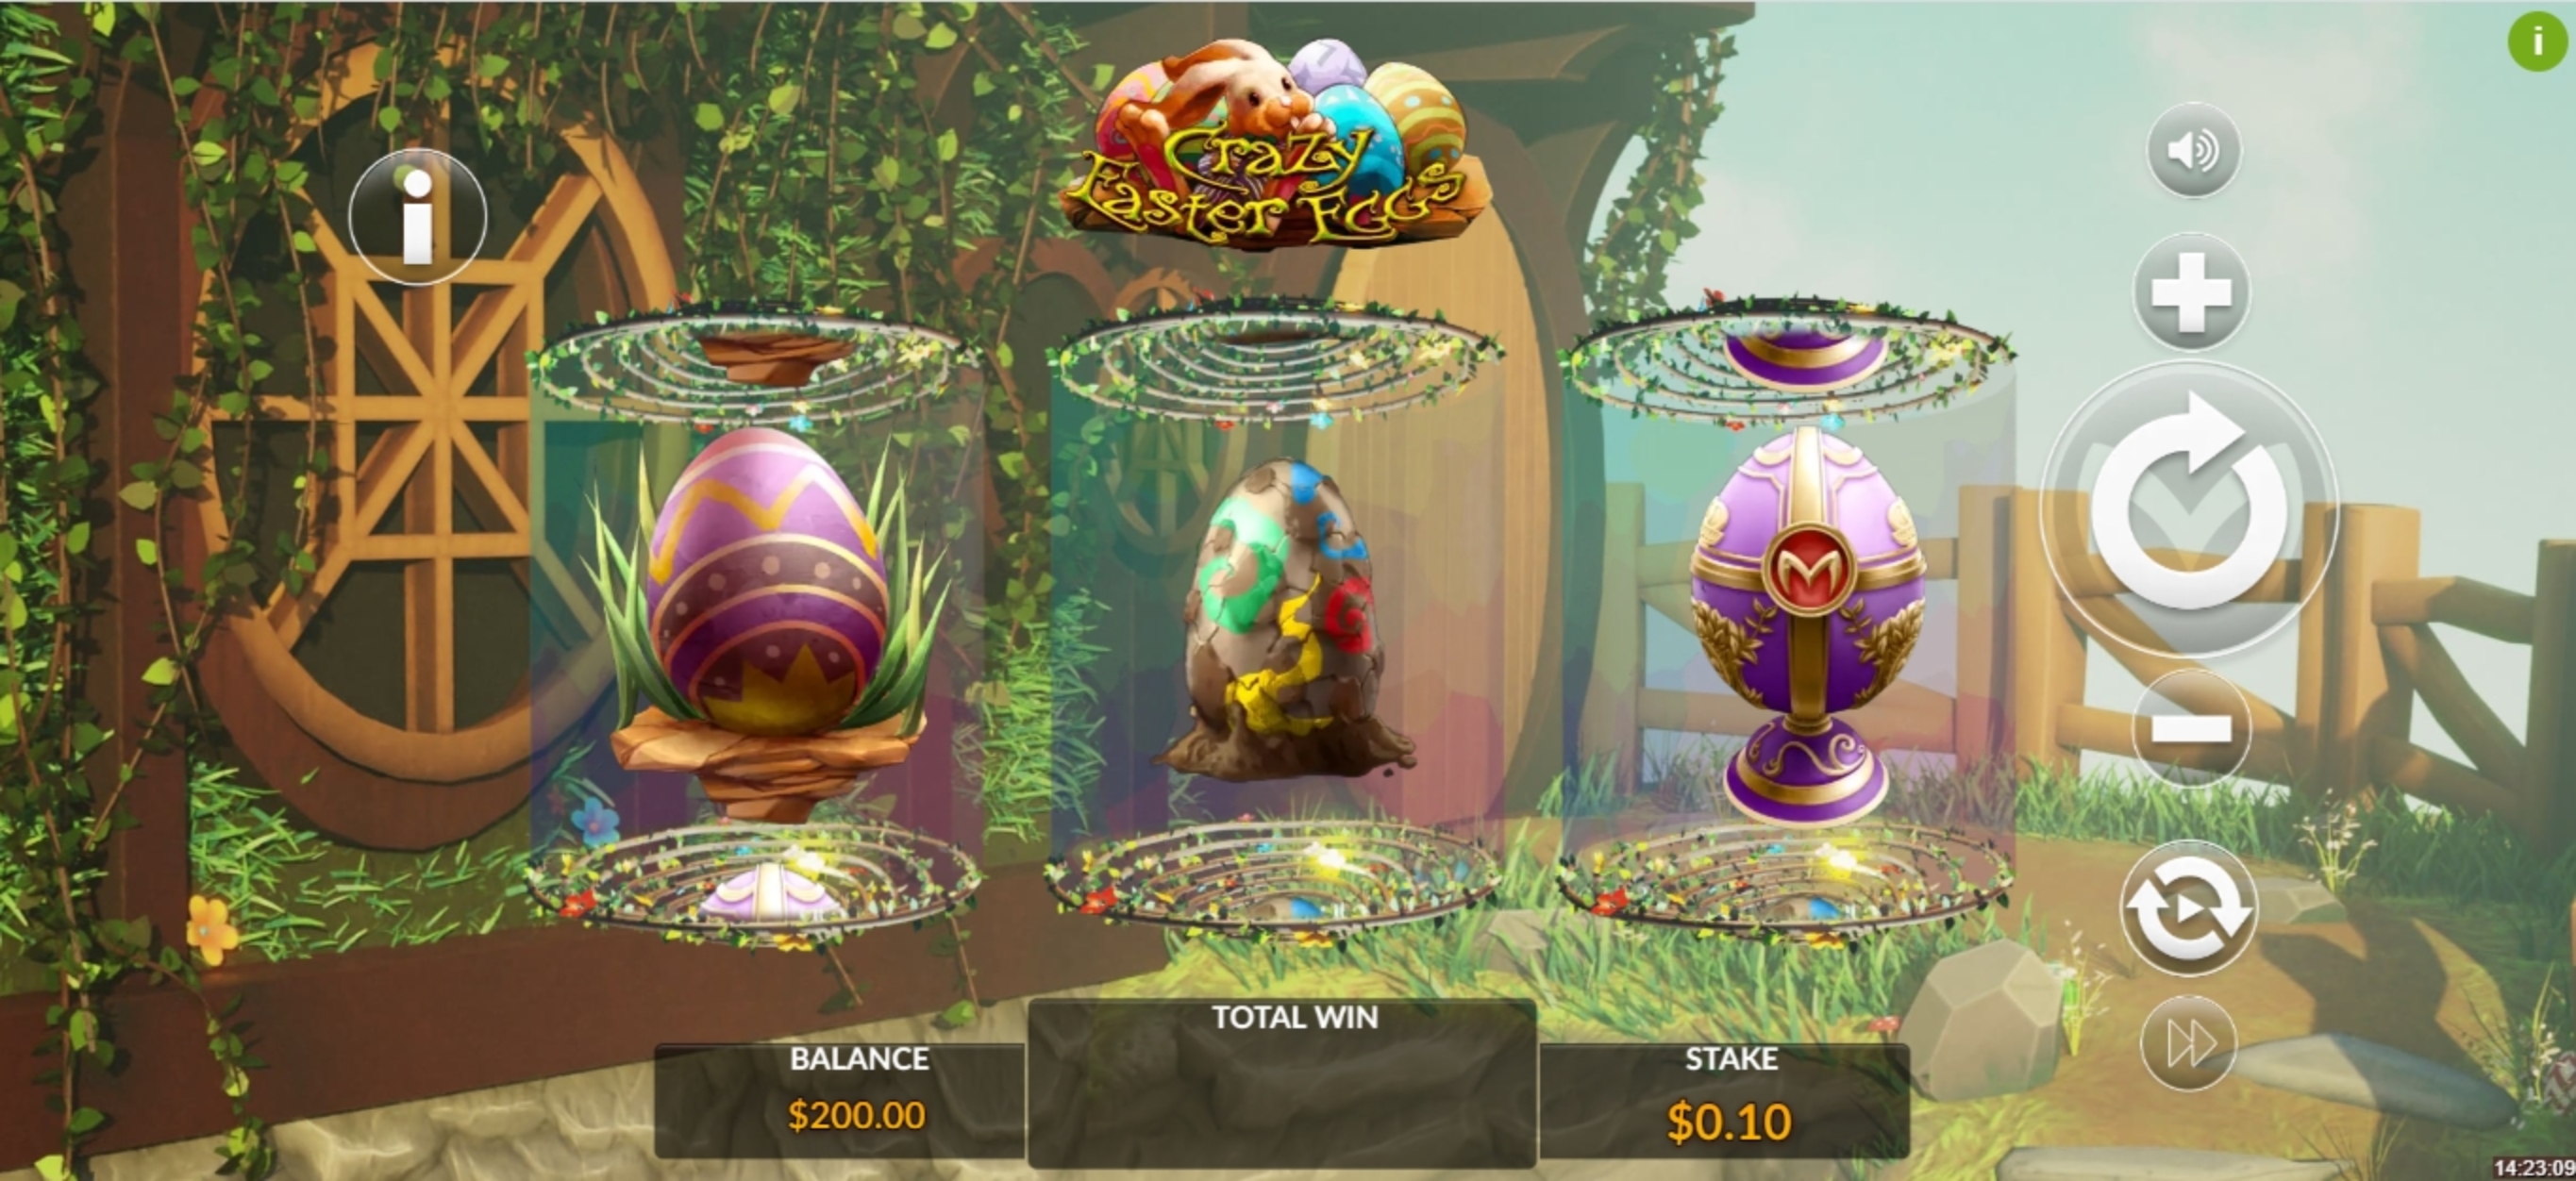 Reels in Crazy Easter Eggs Slot Game by Maverick